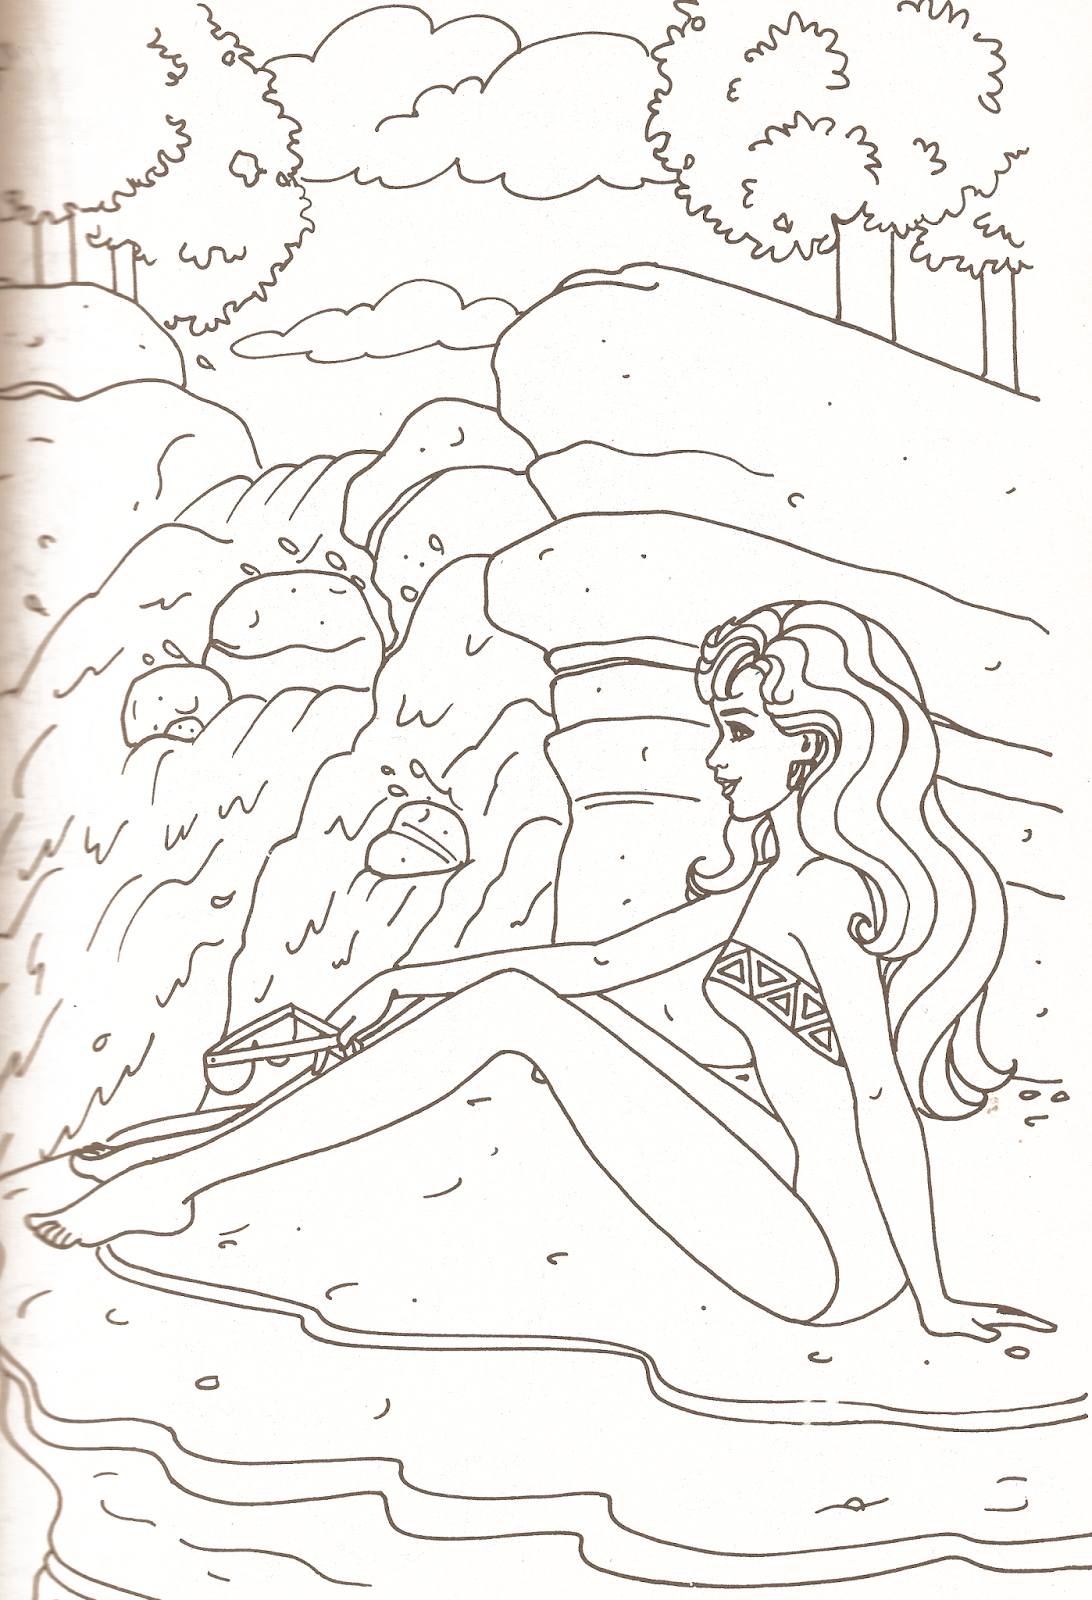 Missy Paper Dolls Barbie Coloring Pages Part 1 Book Library